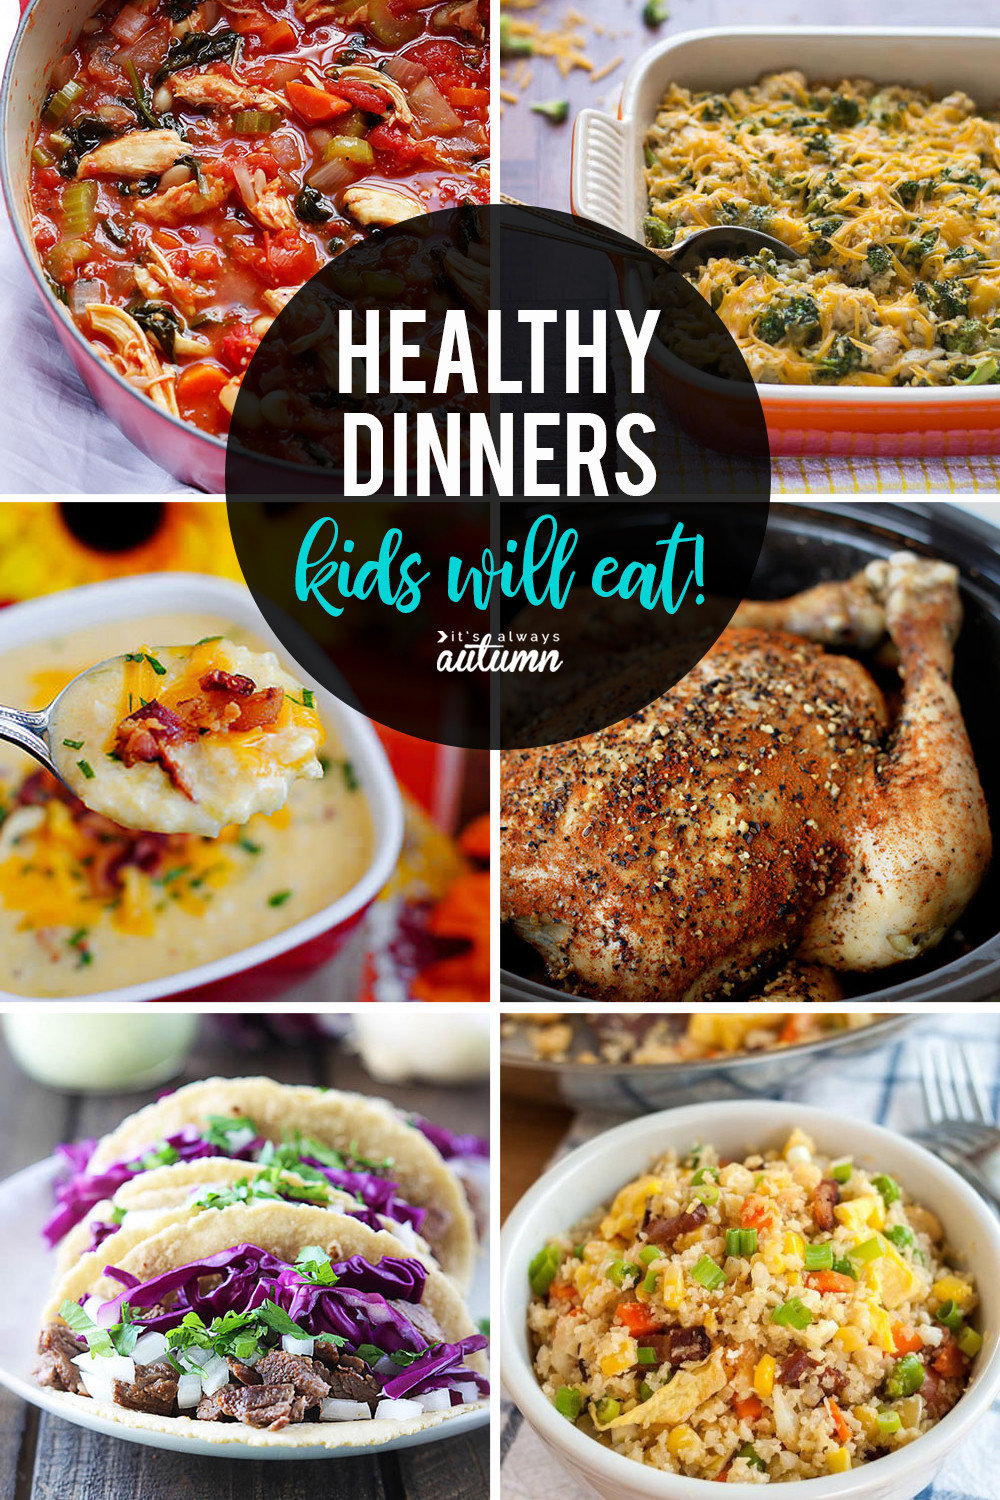 Fun Dinner Ideas For Kids
 20 healthy easy recipes your kids will actually want to